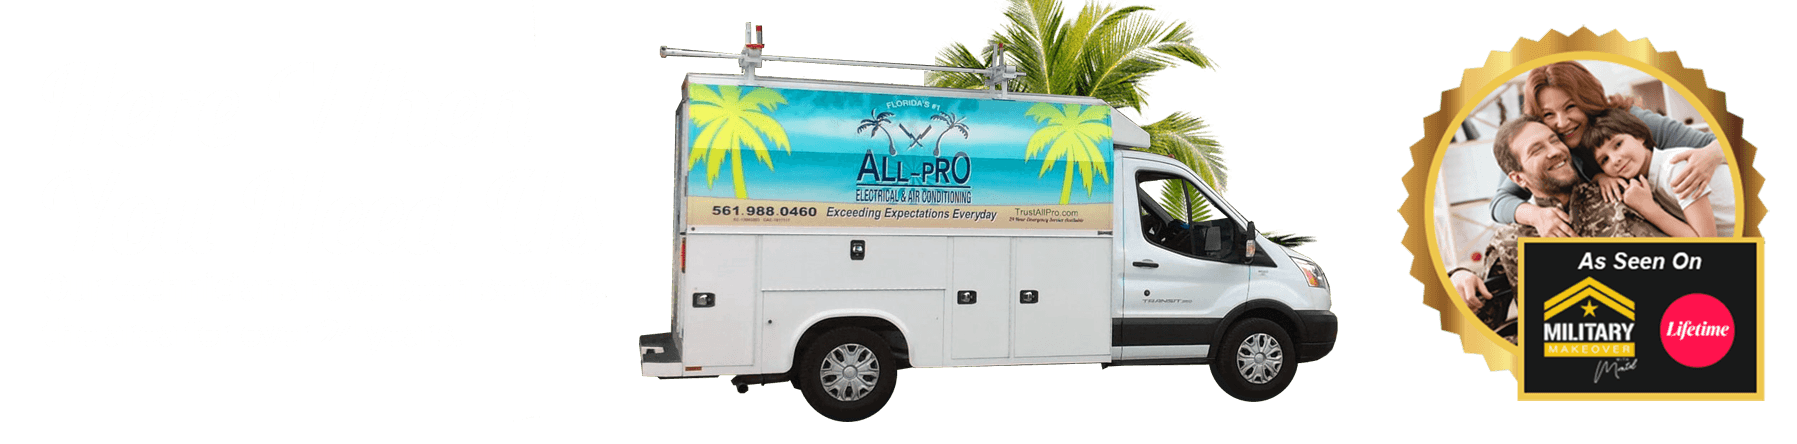 All-Pro Electrical & Air Conditioning Boca Raton Florida